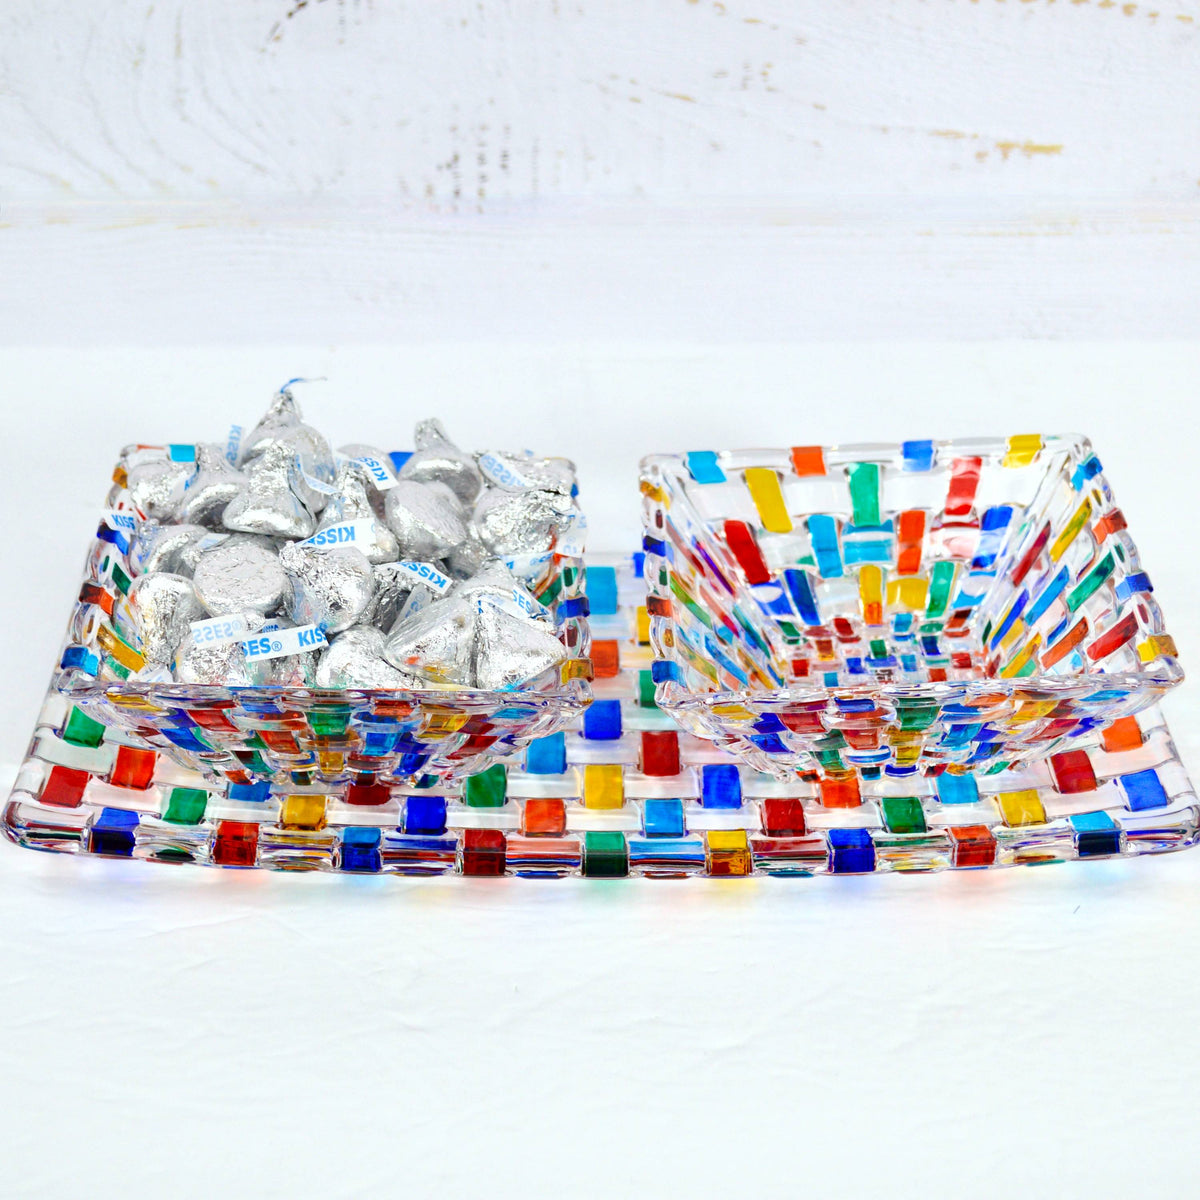 Bossanova Glass Tray with Two Square Bowls, Hand Painted Crystal, Made in Italy - My Italian Decor